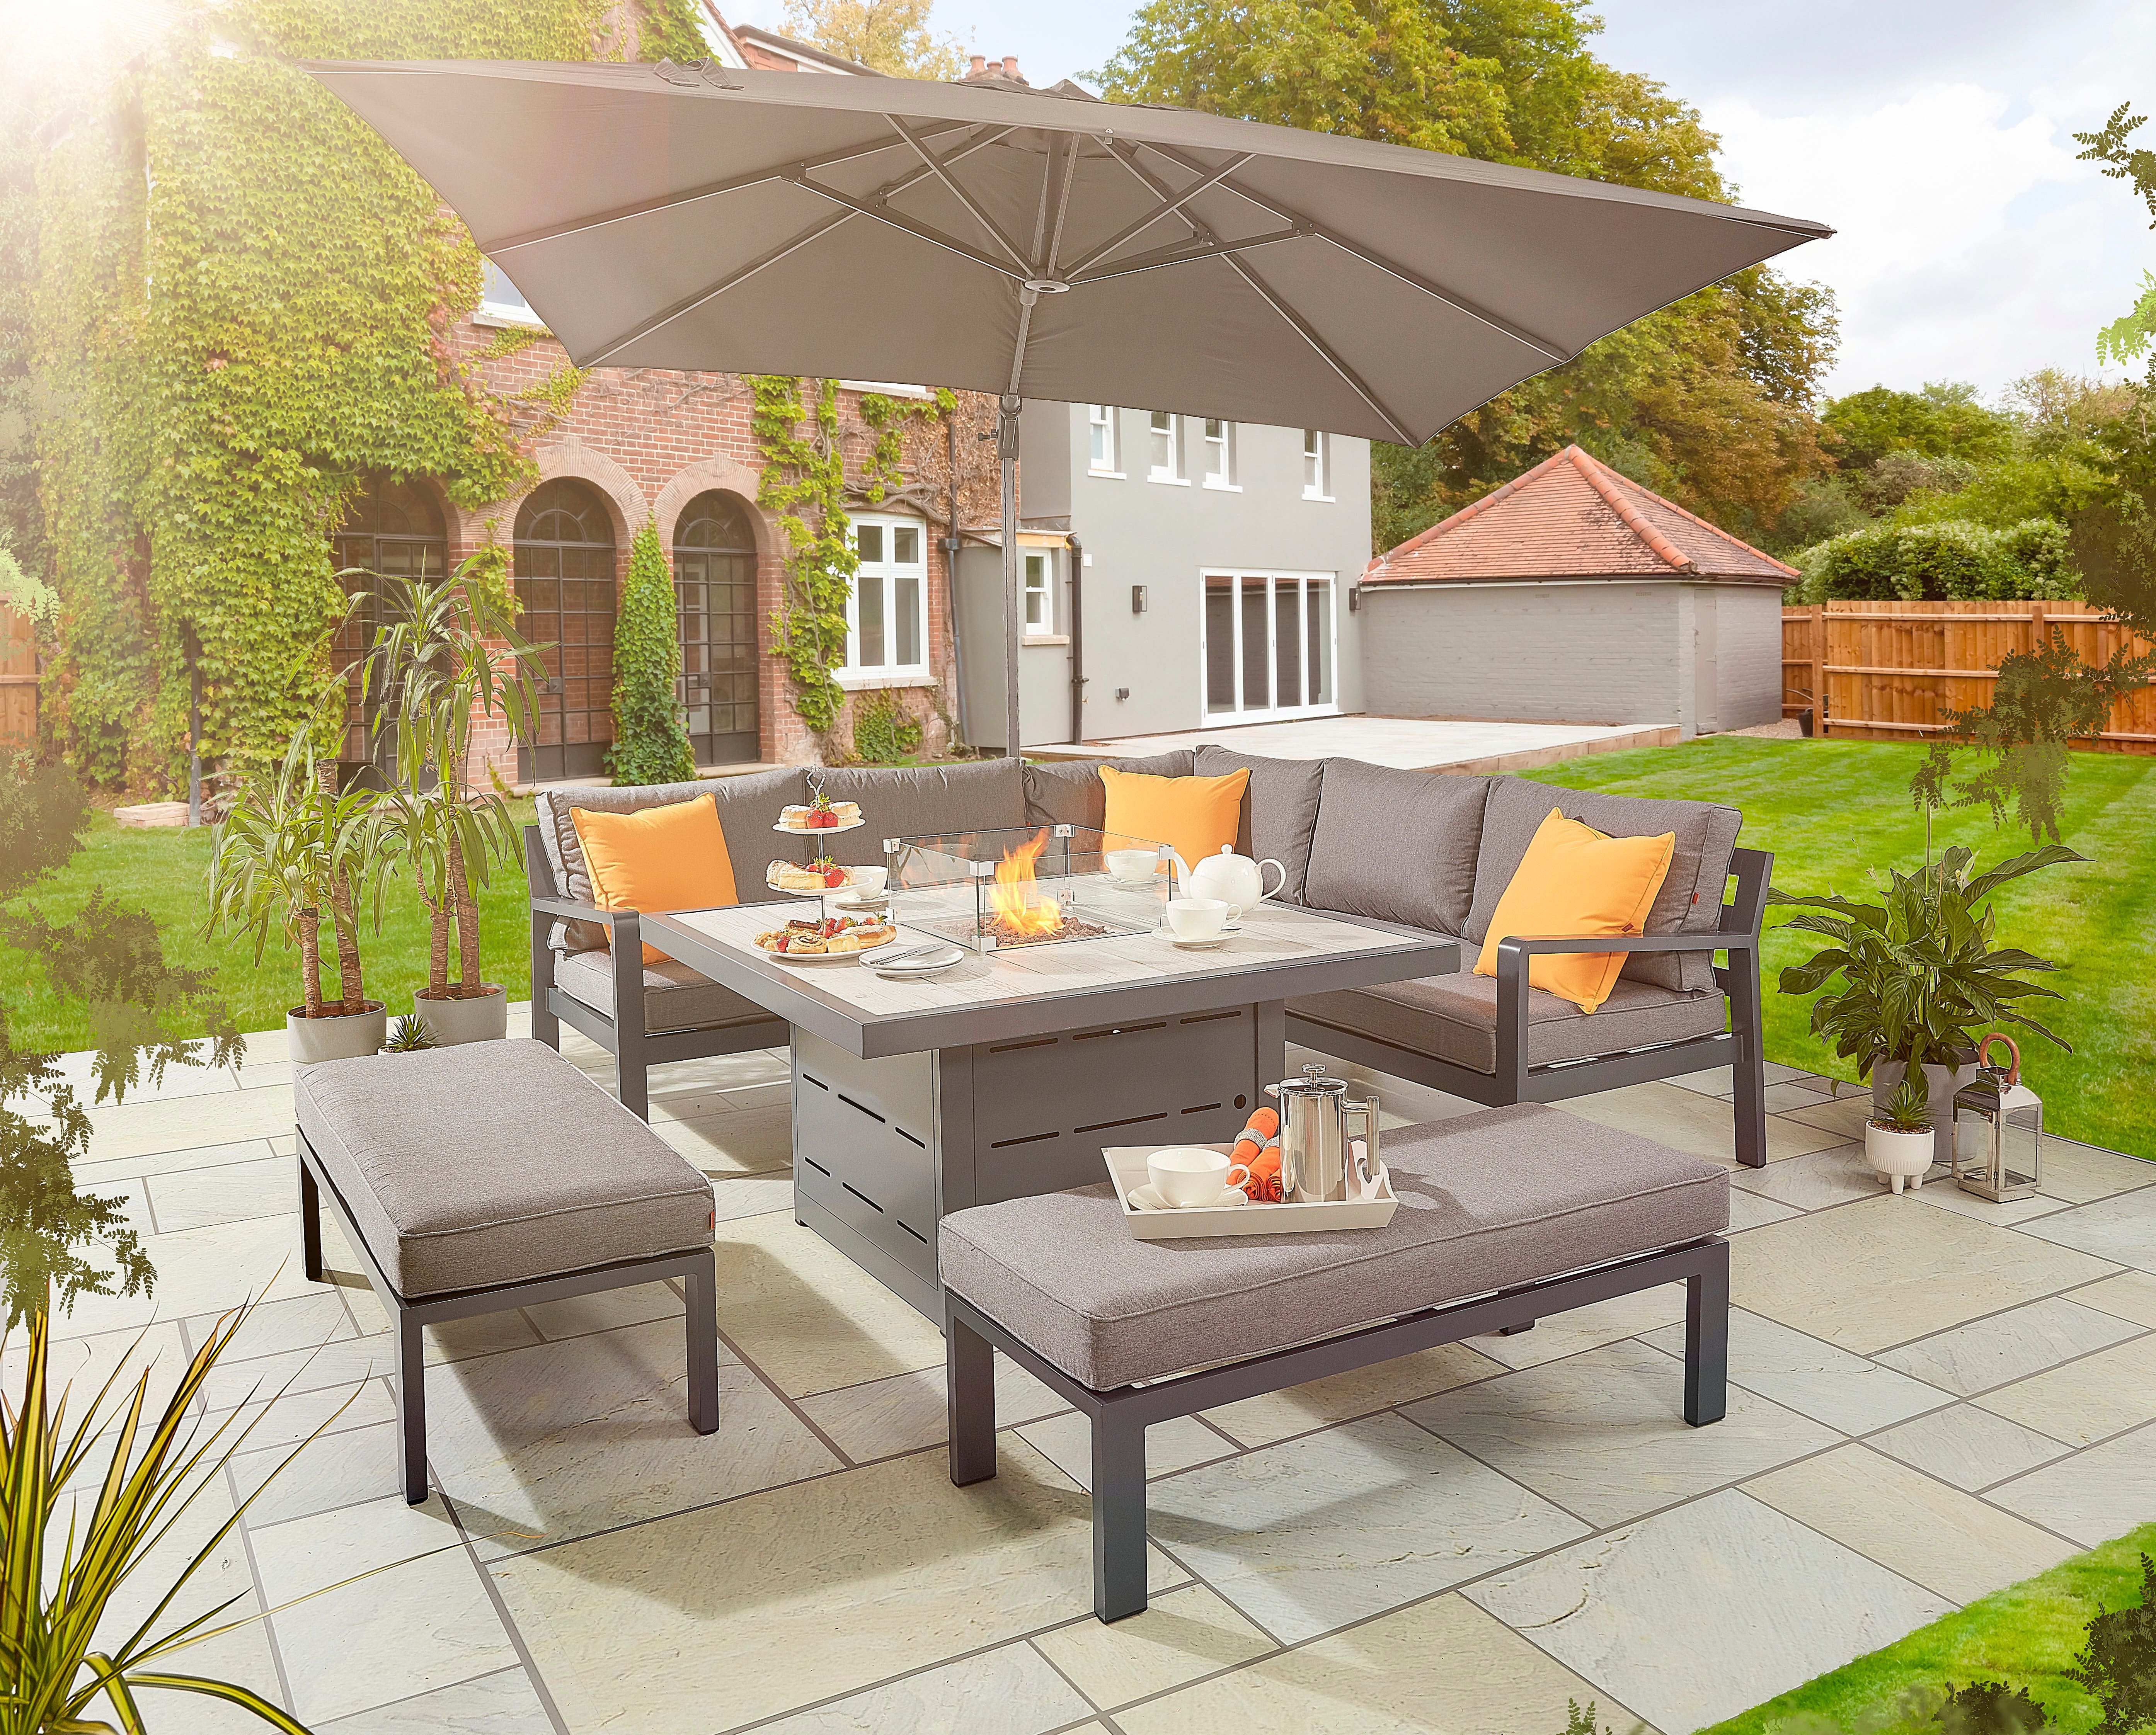 Introducing Marchington and Tutbury - HEX Living Garden Furniture is Finally Here!